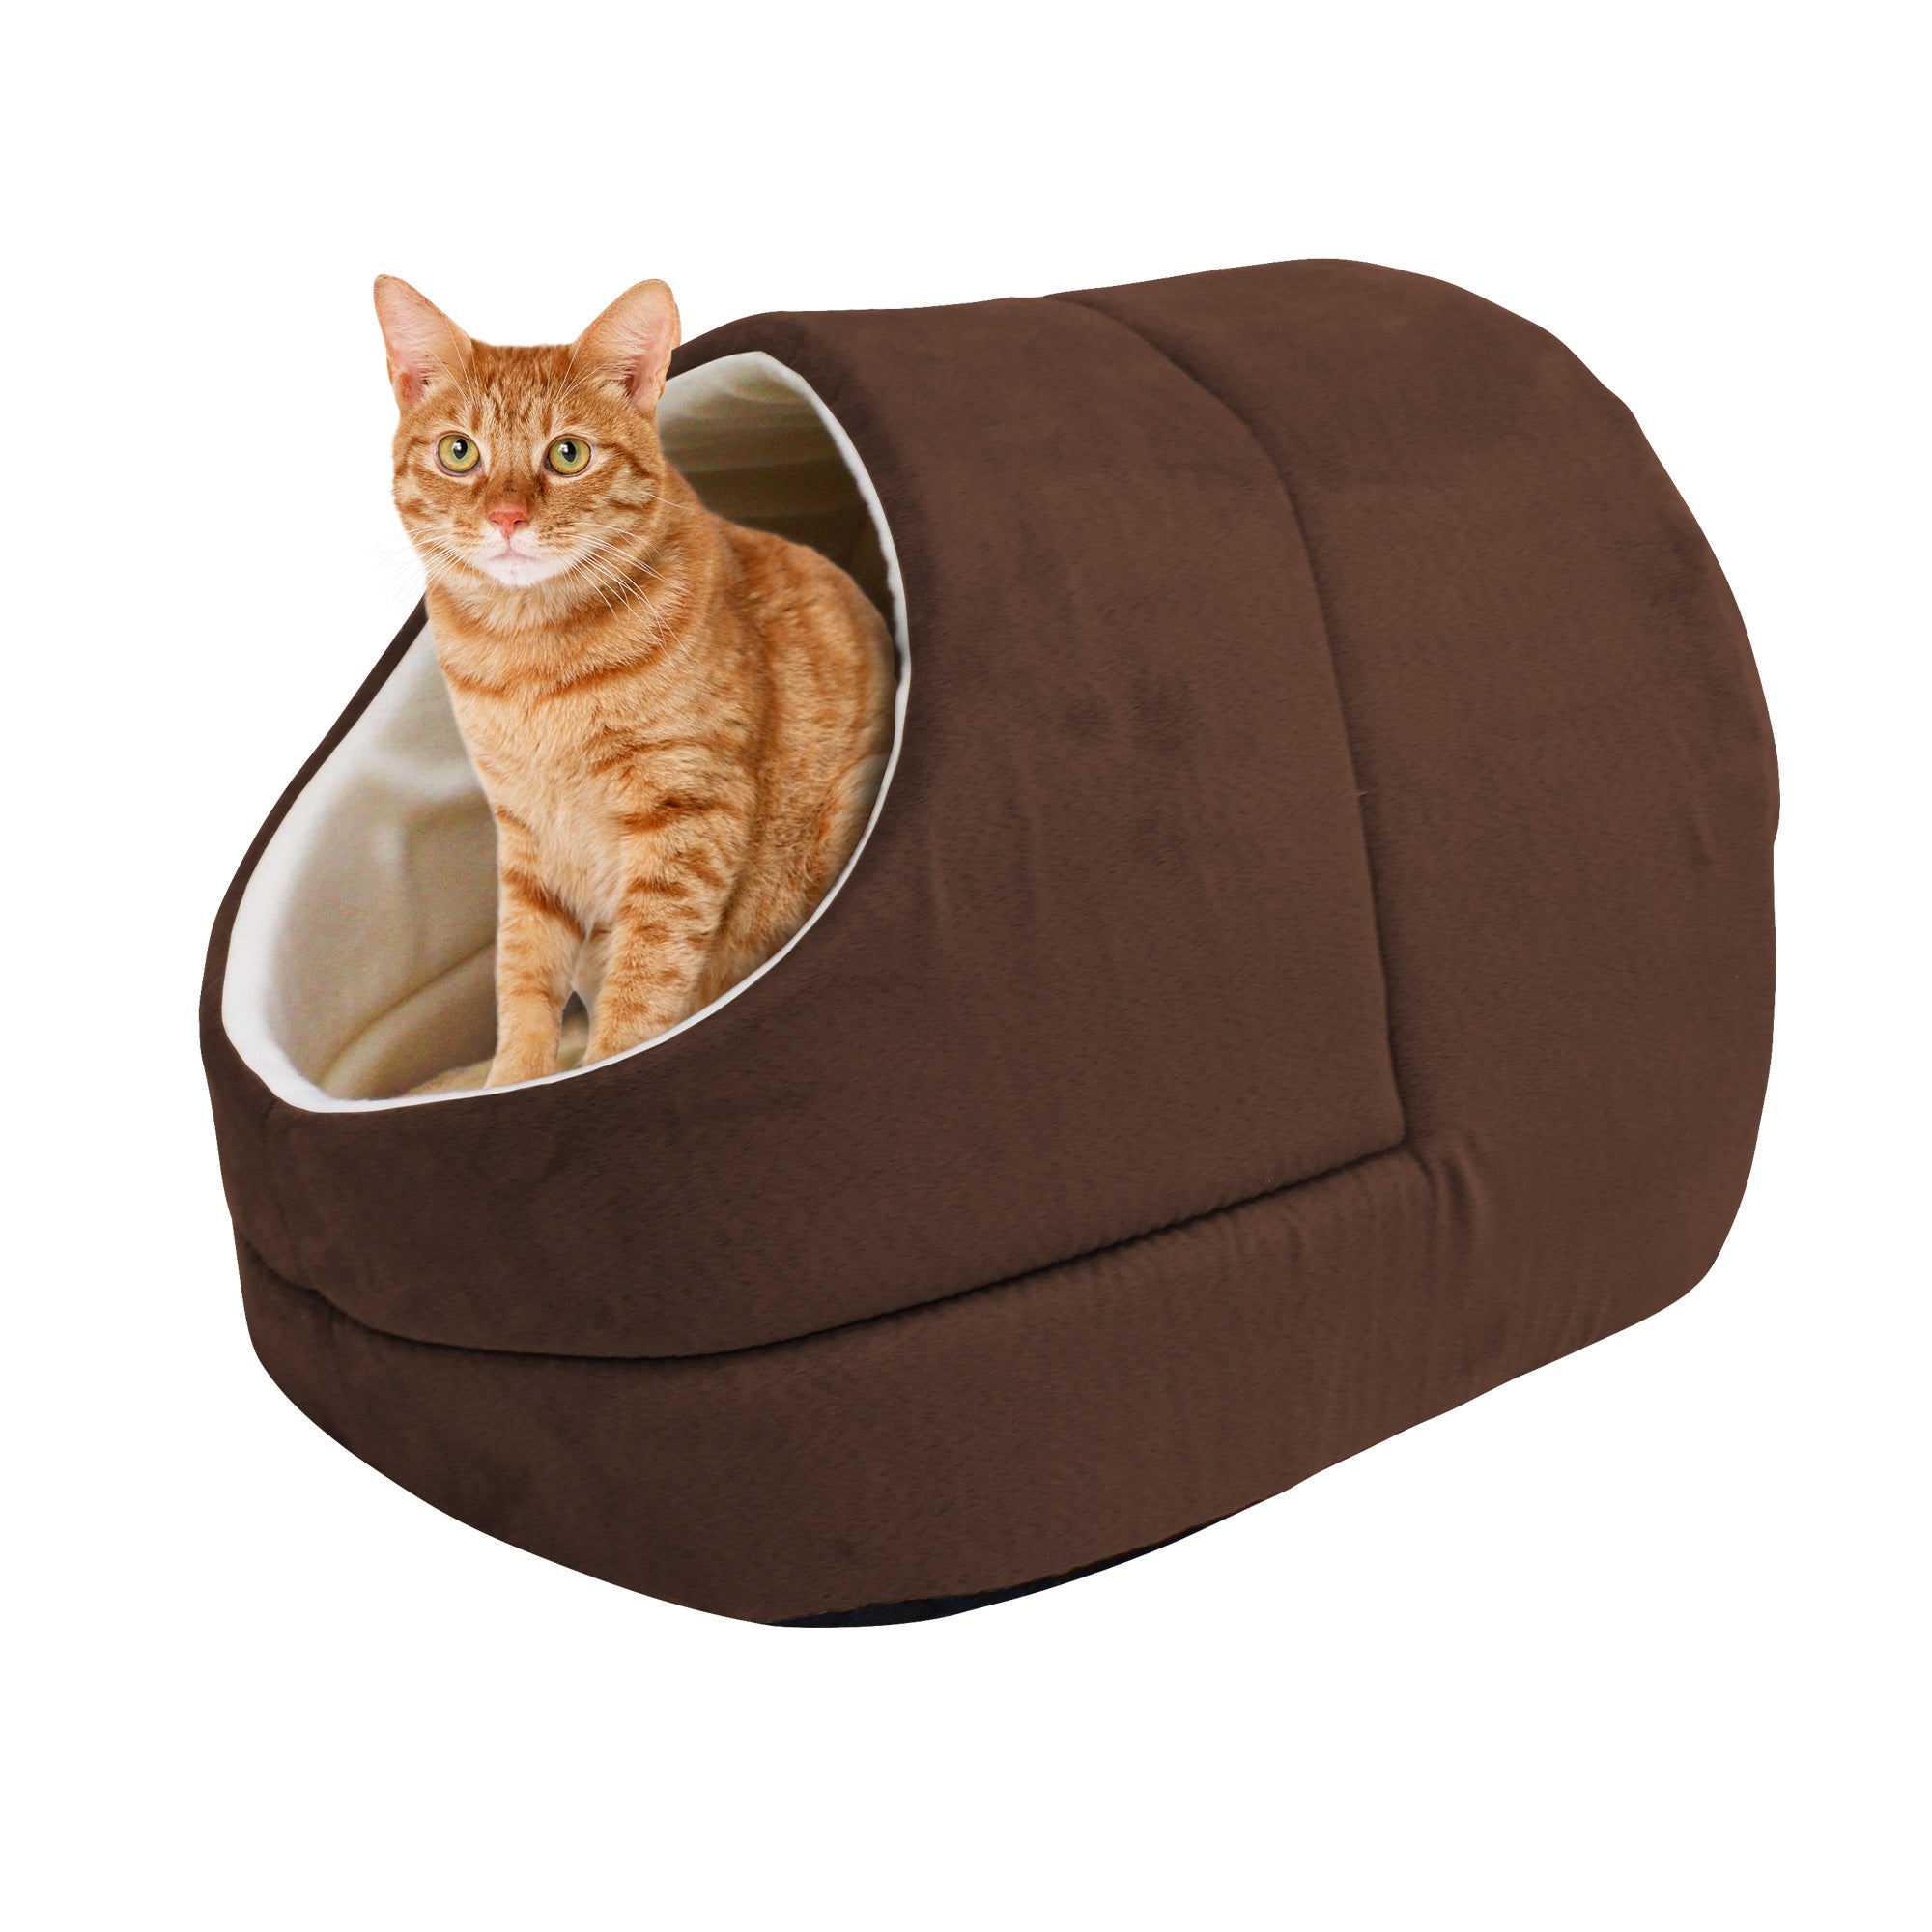 GOOPAWS Cave Covered for Cat Small Dog Warming Burrow Cat Bed, Brown